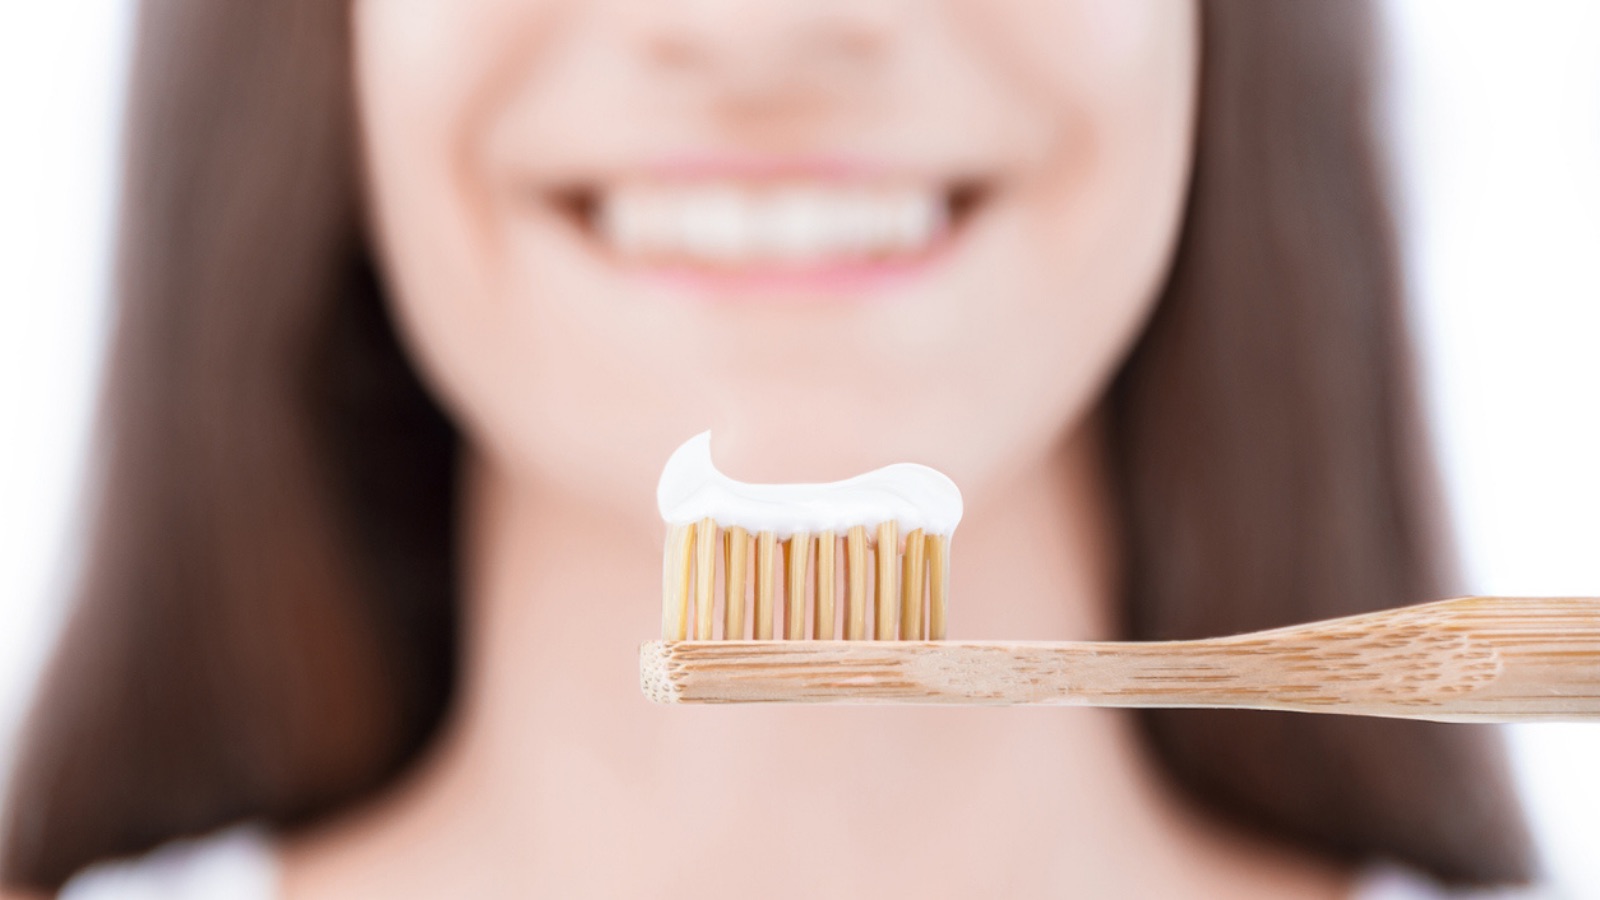 Myth Busting, Tooth Brushing and Good Daily Habits For Oral Health